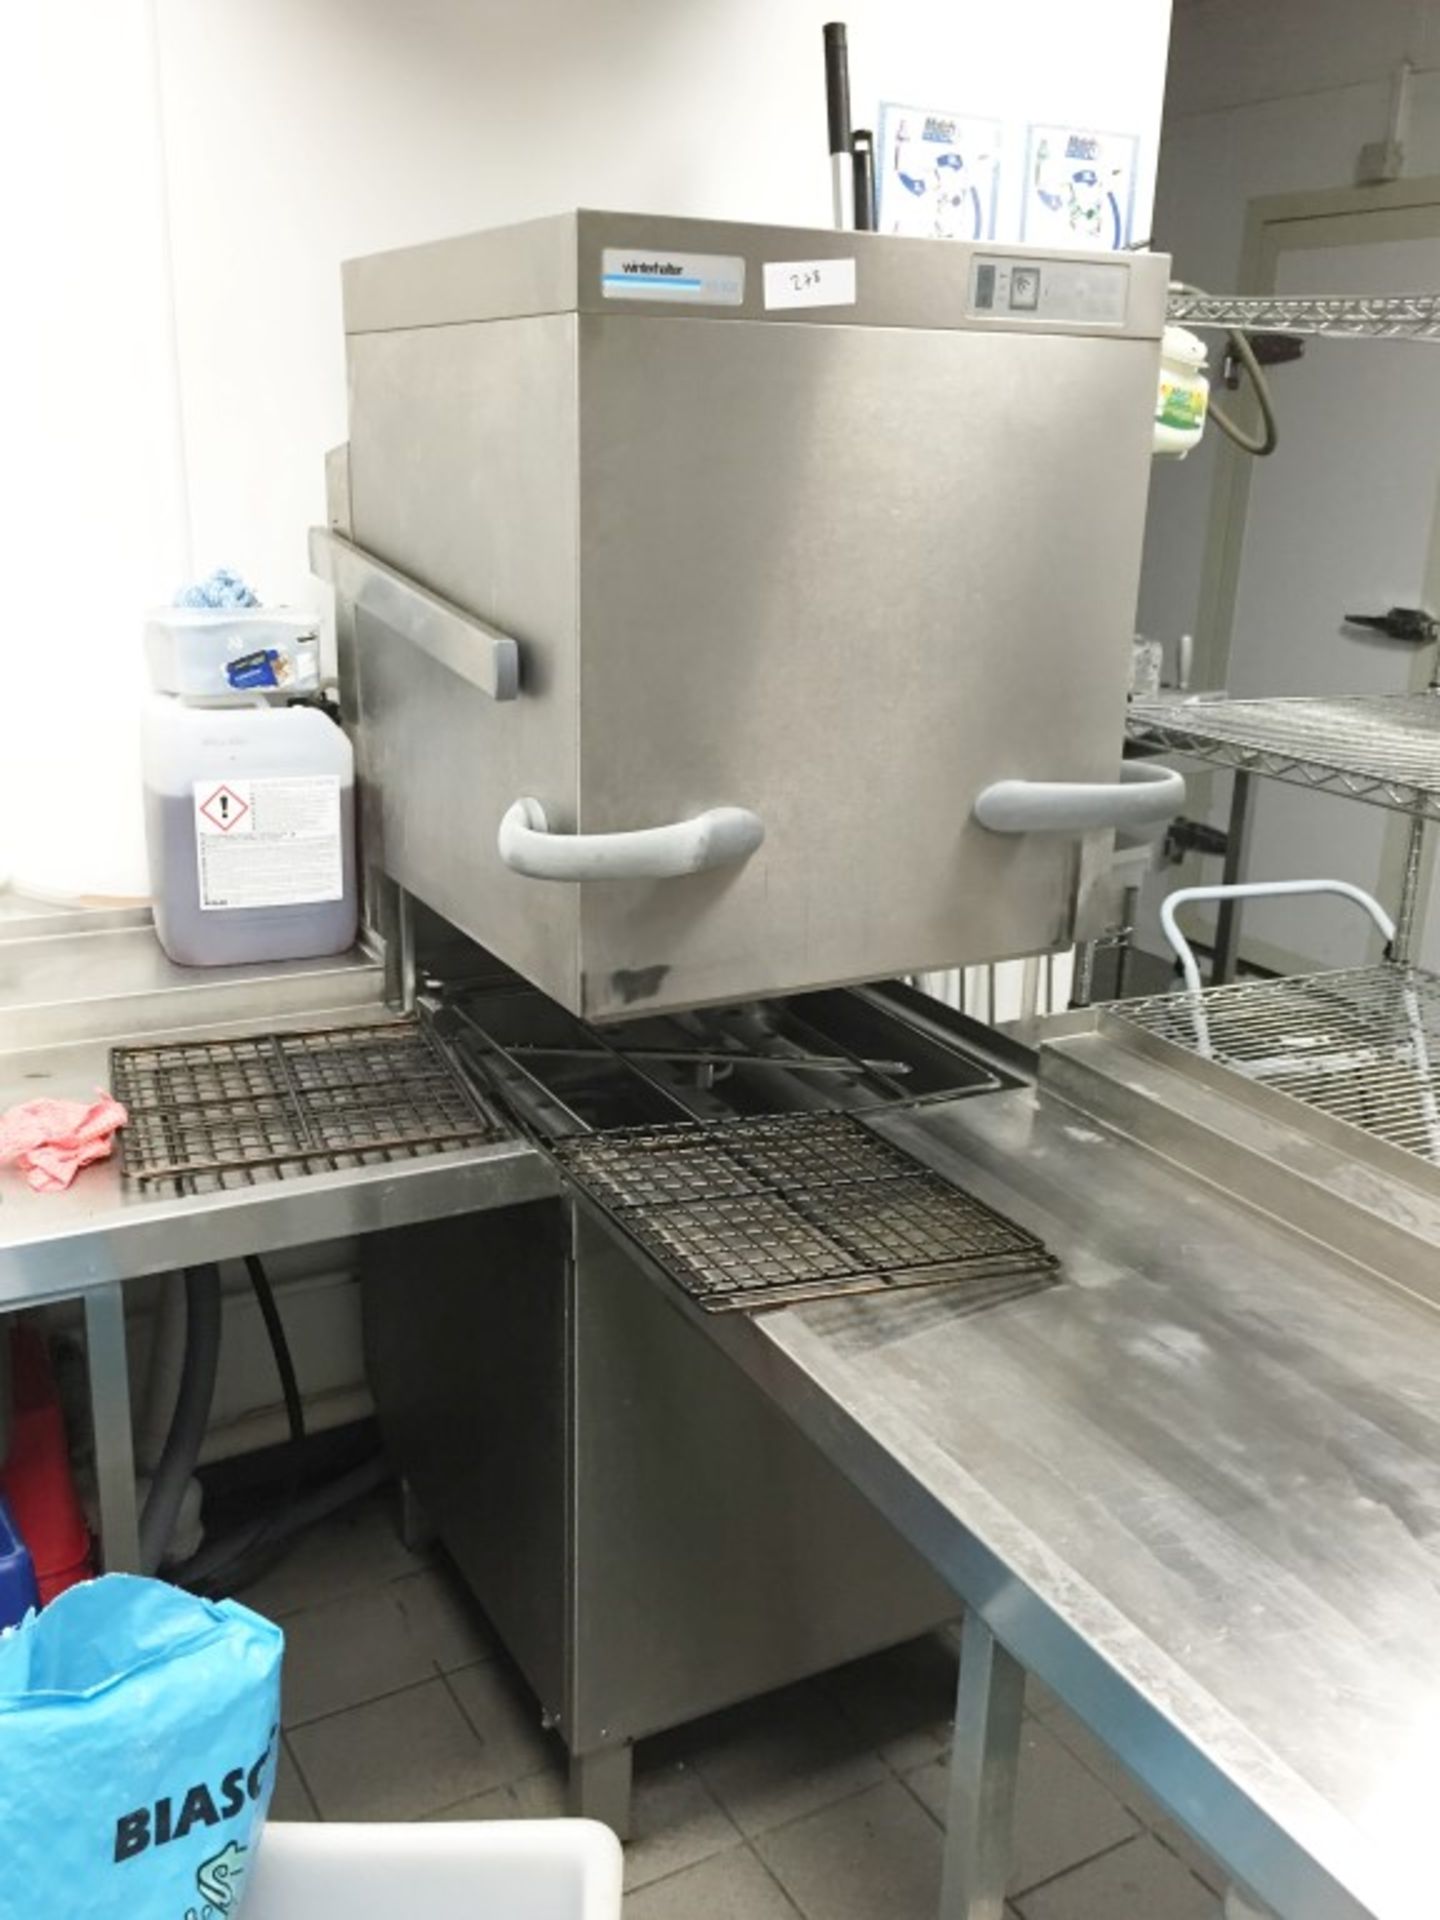 1 x Winterhalter GS502 Commercial Pass Through Dishwasher Station - Includes Stainless Steel Sink